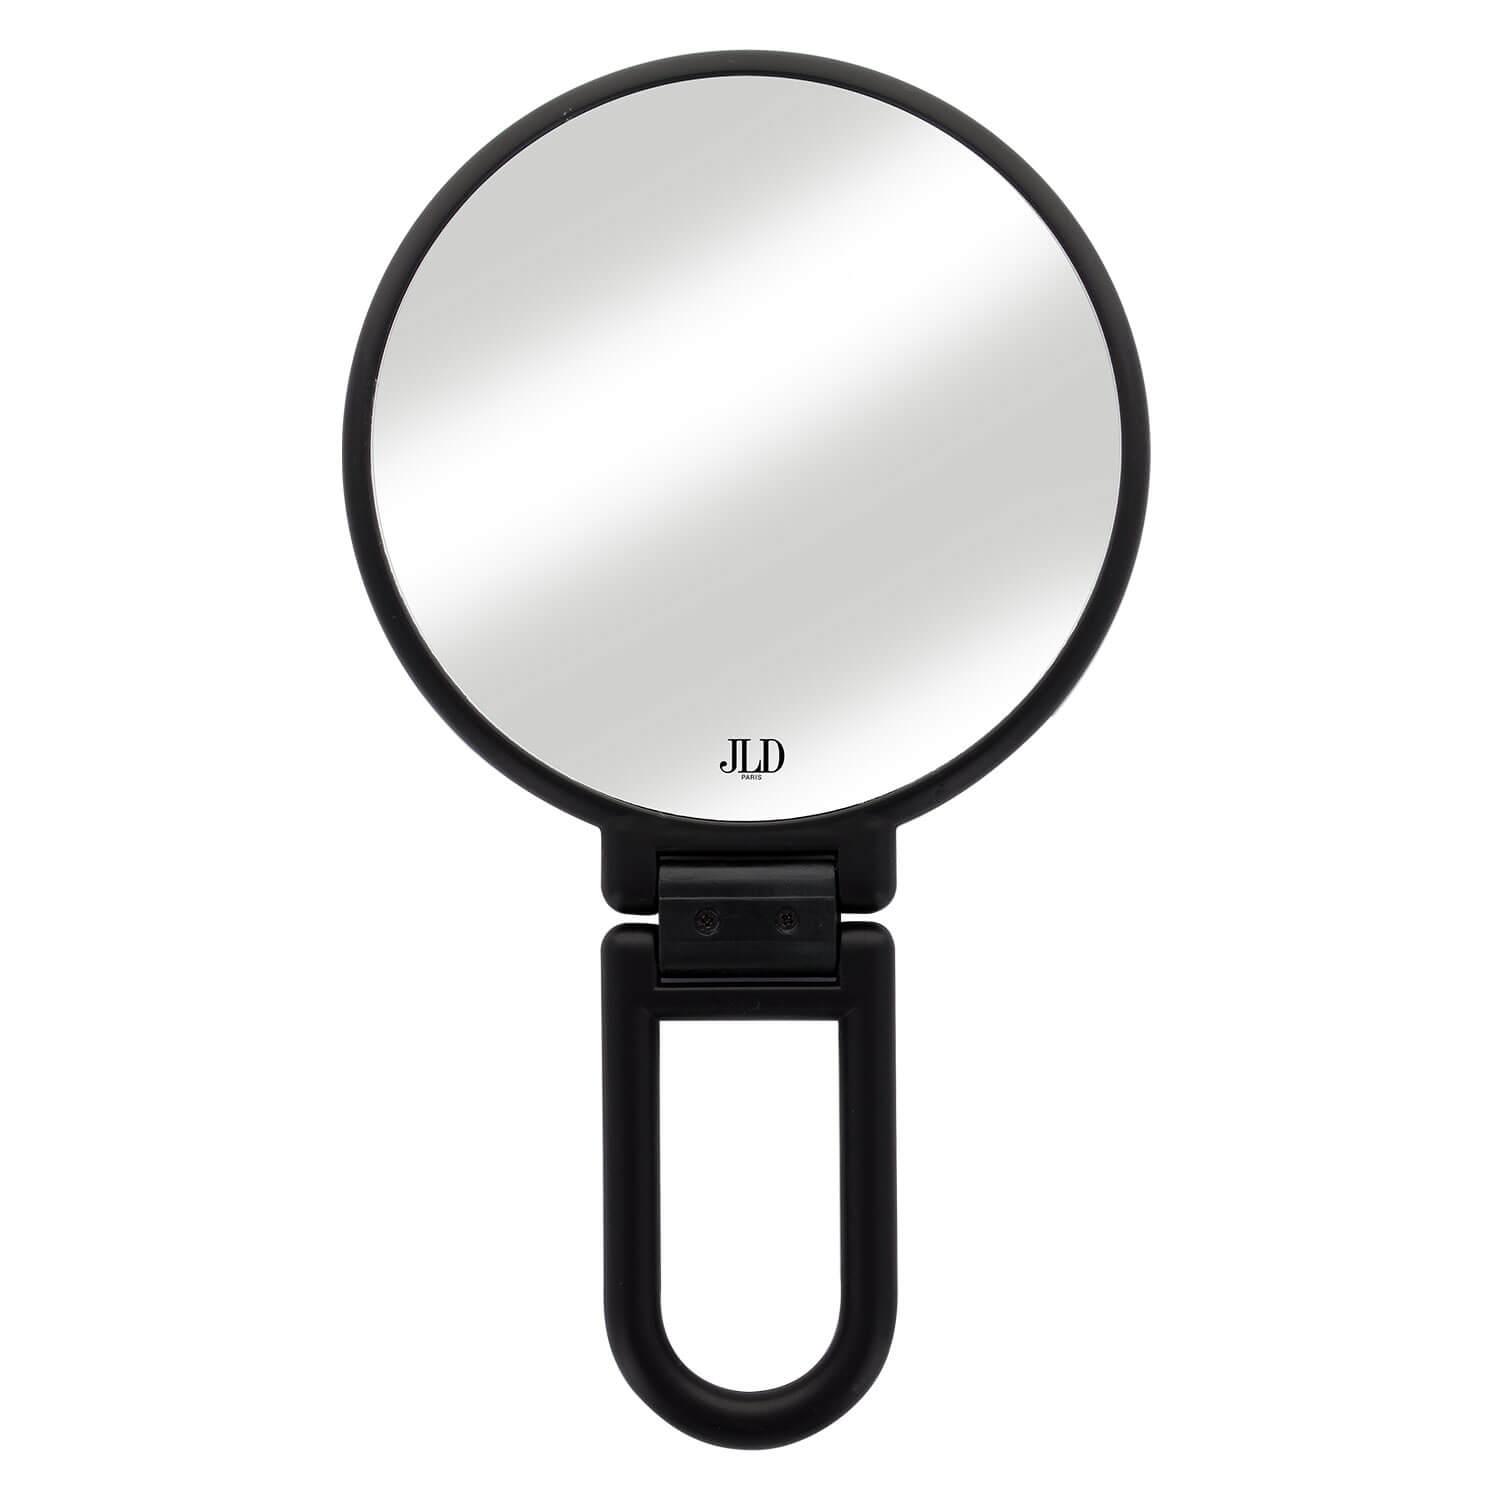 JLD - Adjustable Mirror x1 and x2